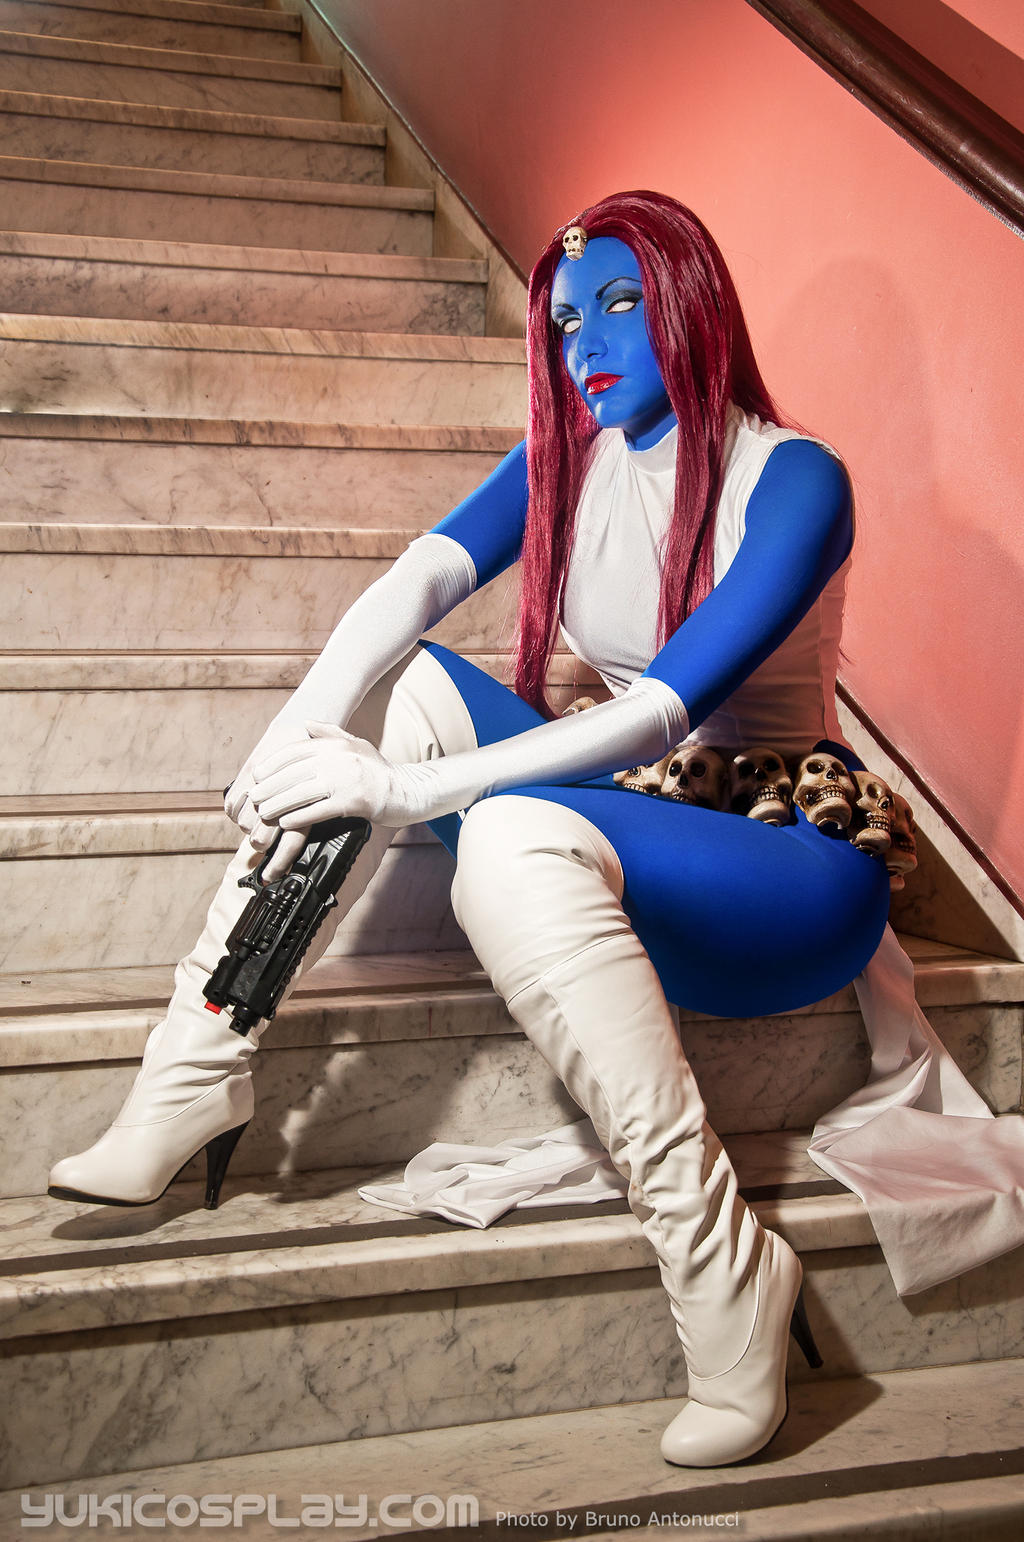 Marvel S Classic Mystique Cosplays Are Mutant Proud Bell Of Lost Souls